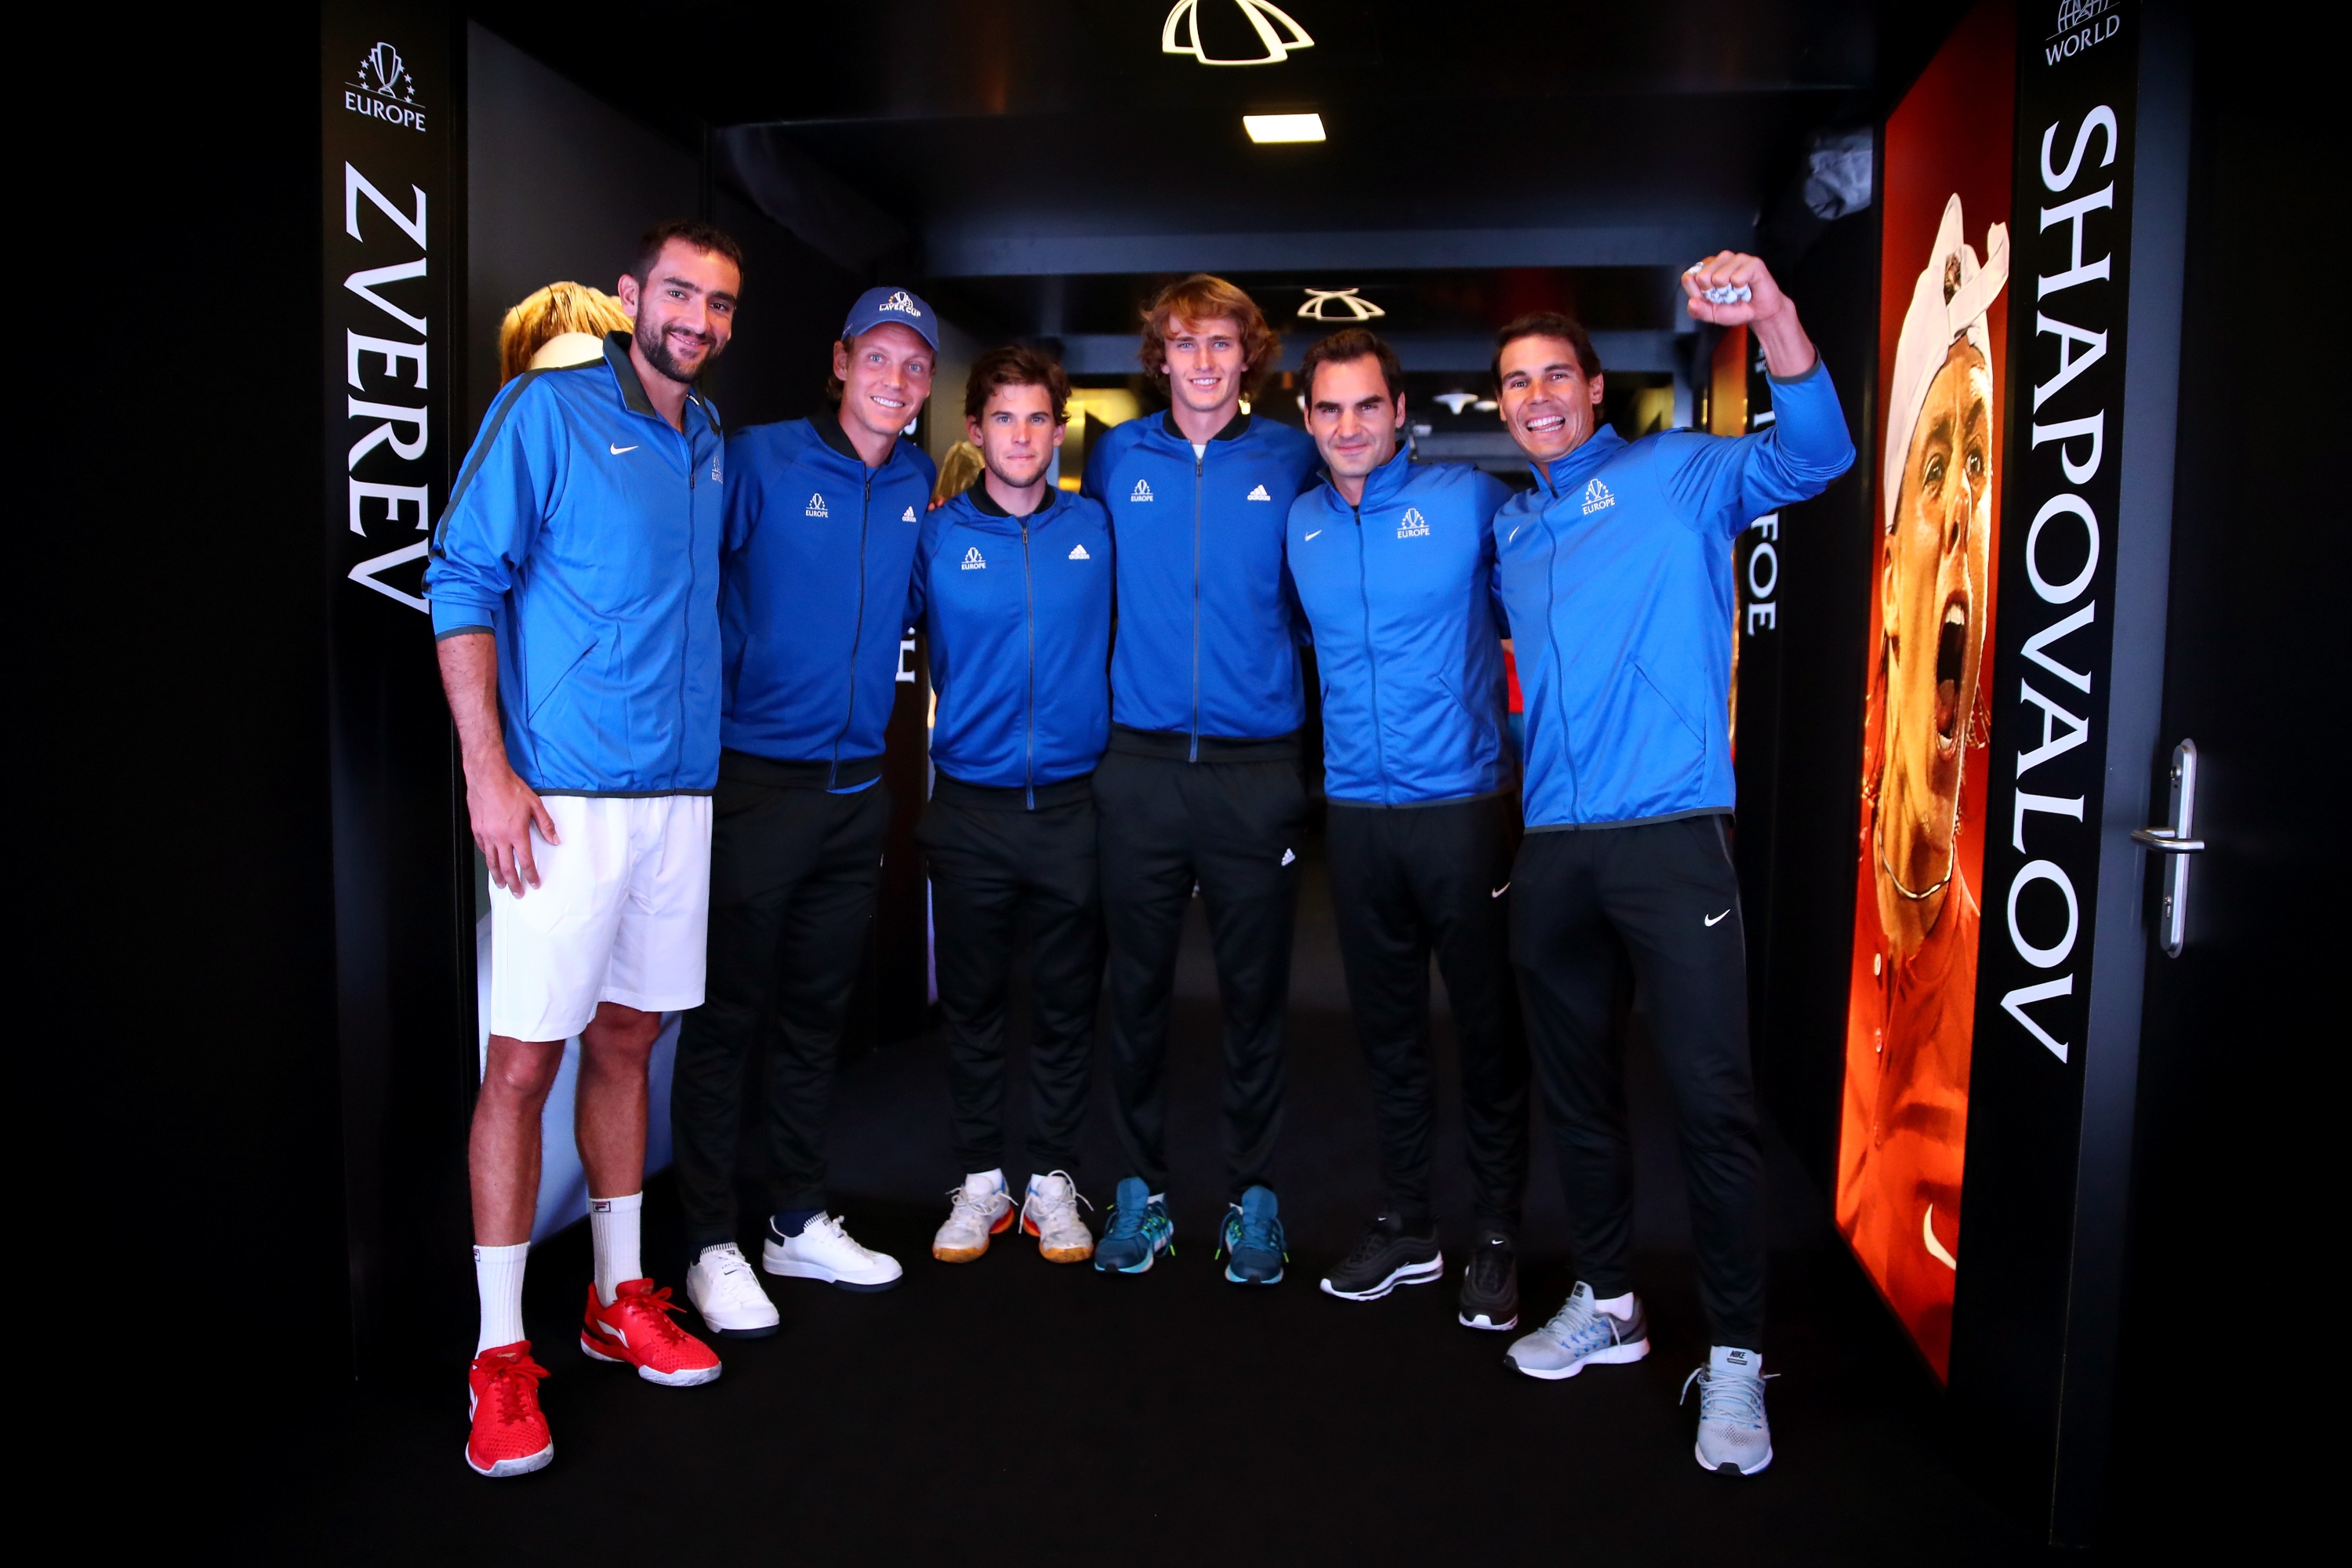 PHOTOS VIDEO: Rafael Nadal And Team Europe At 2017 Laver Cup